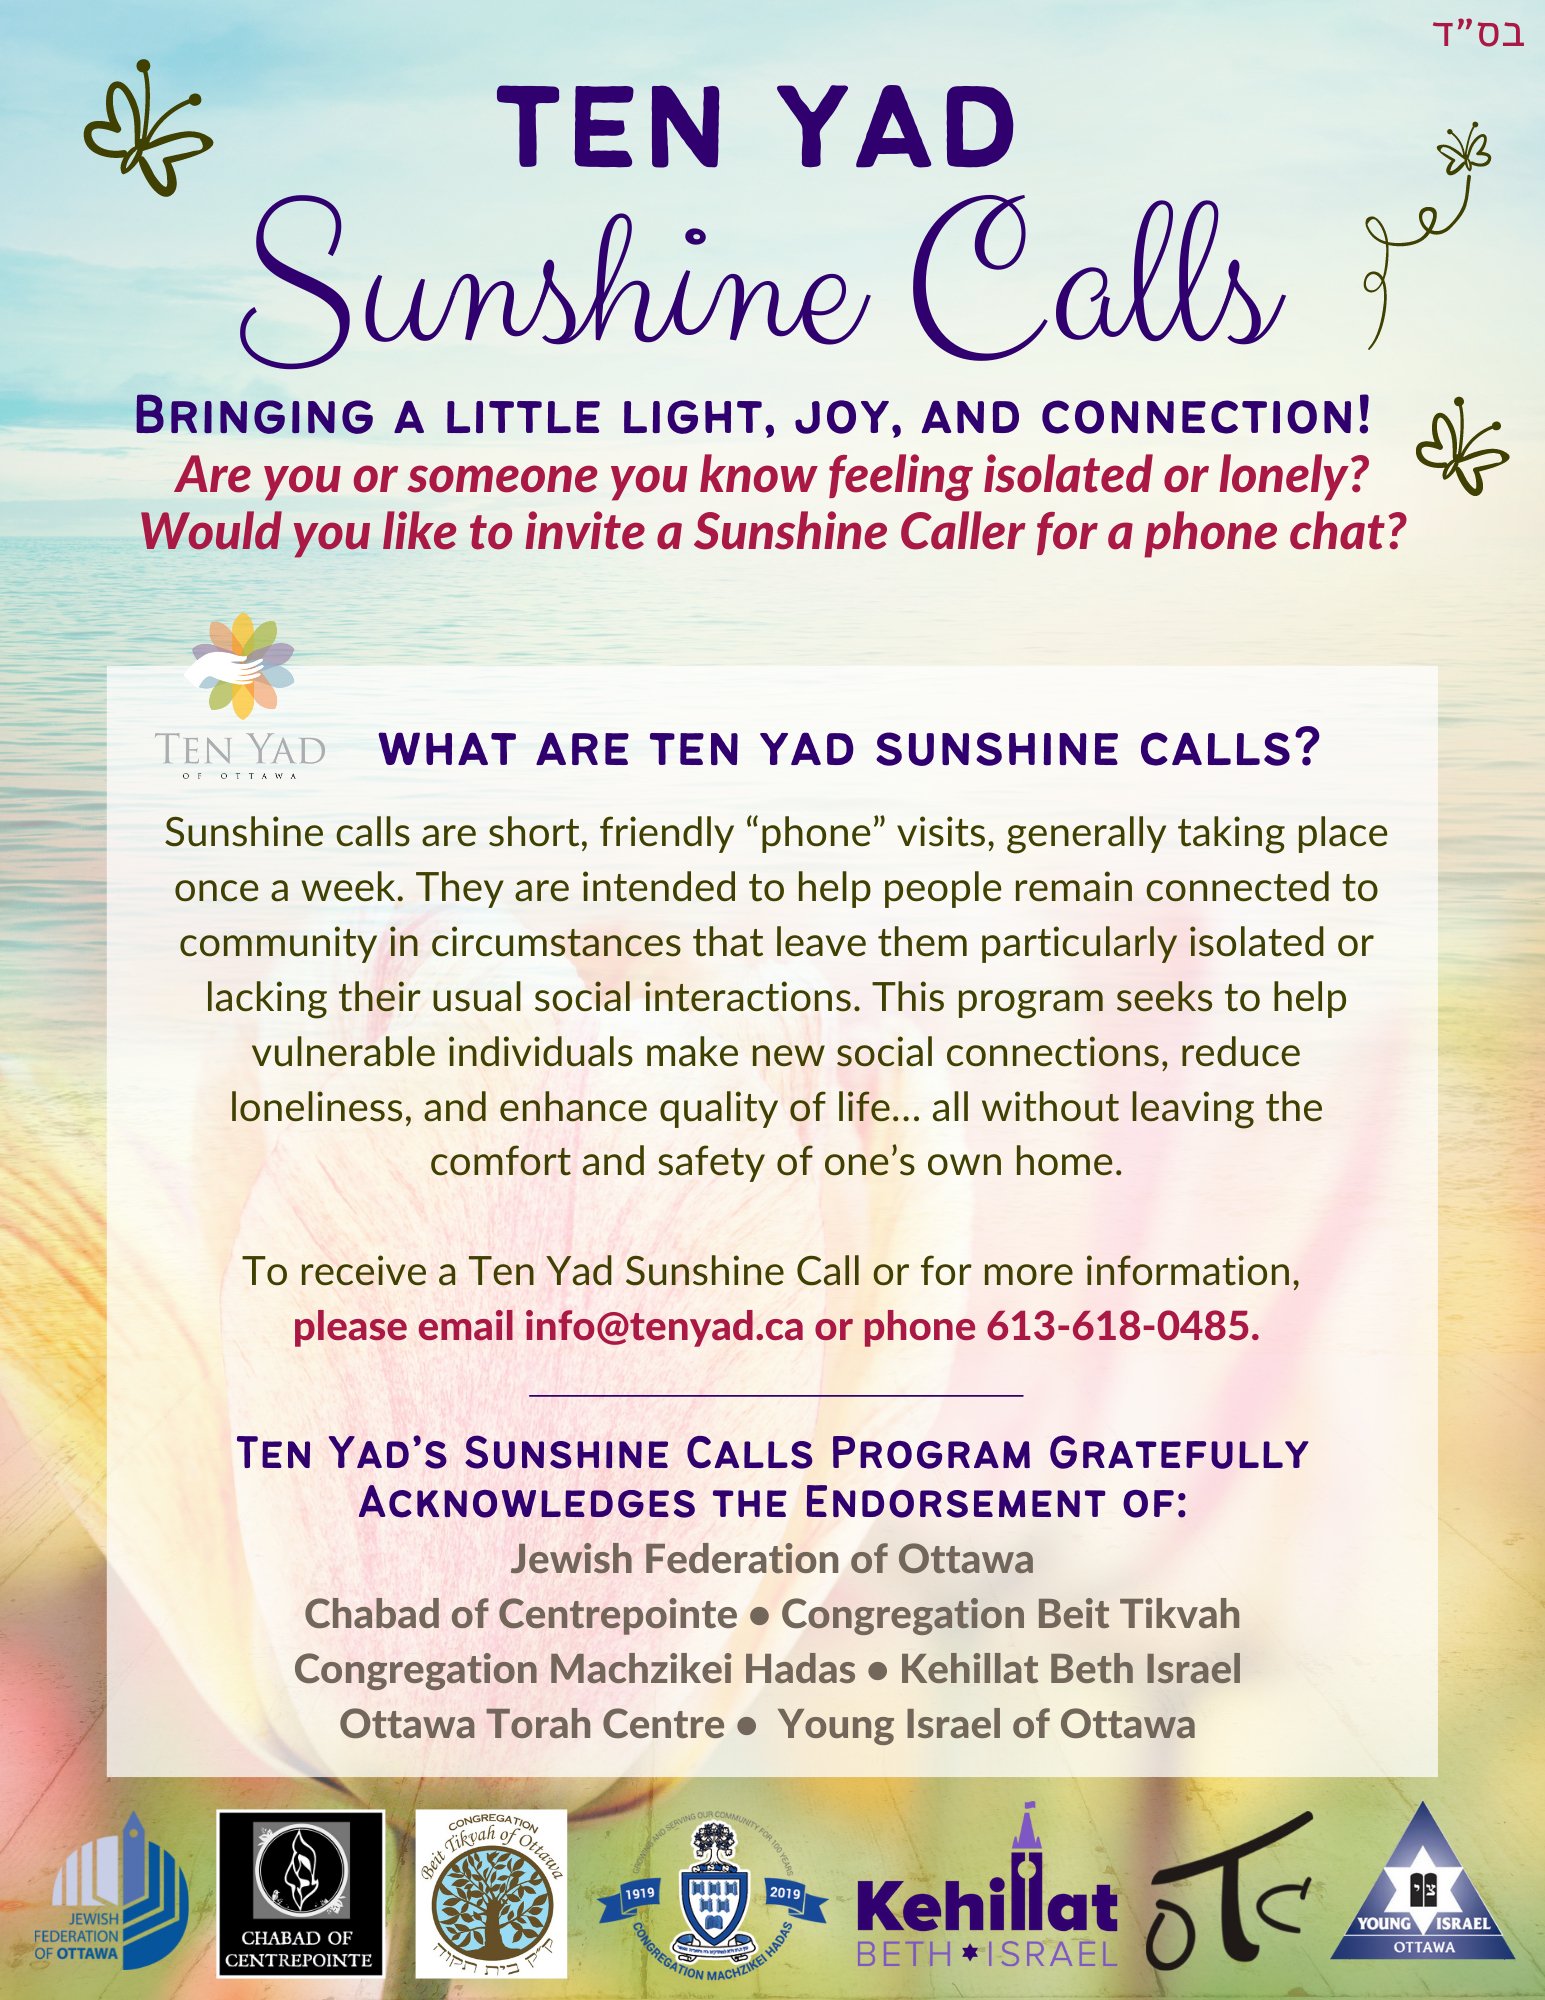 Jewish Ottawa on X: "Have you heard about Ten Yad's Sunshine Calls?  https://t.co/aJdeFt5g8h" / X